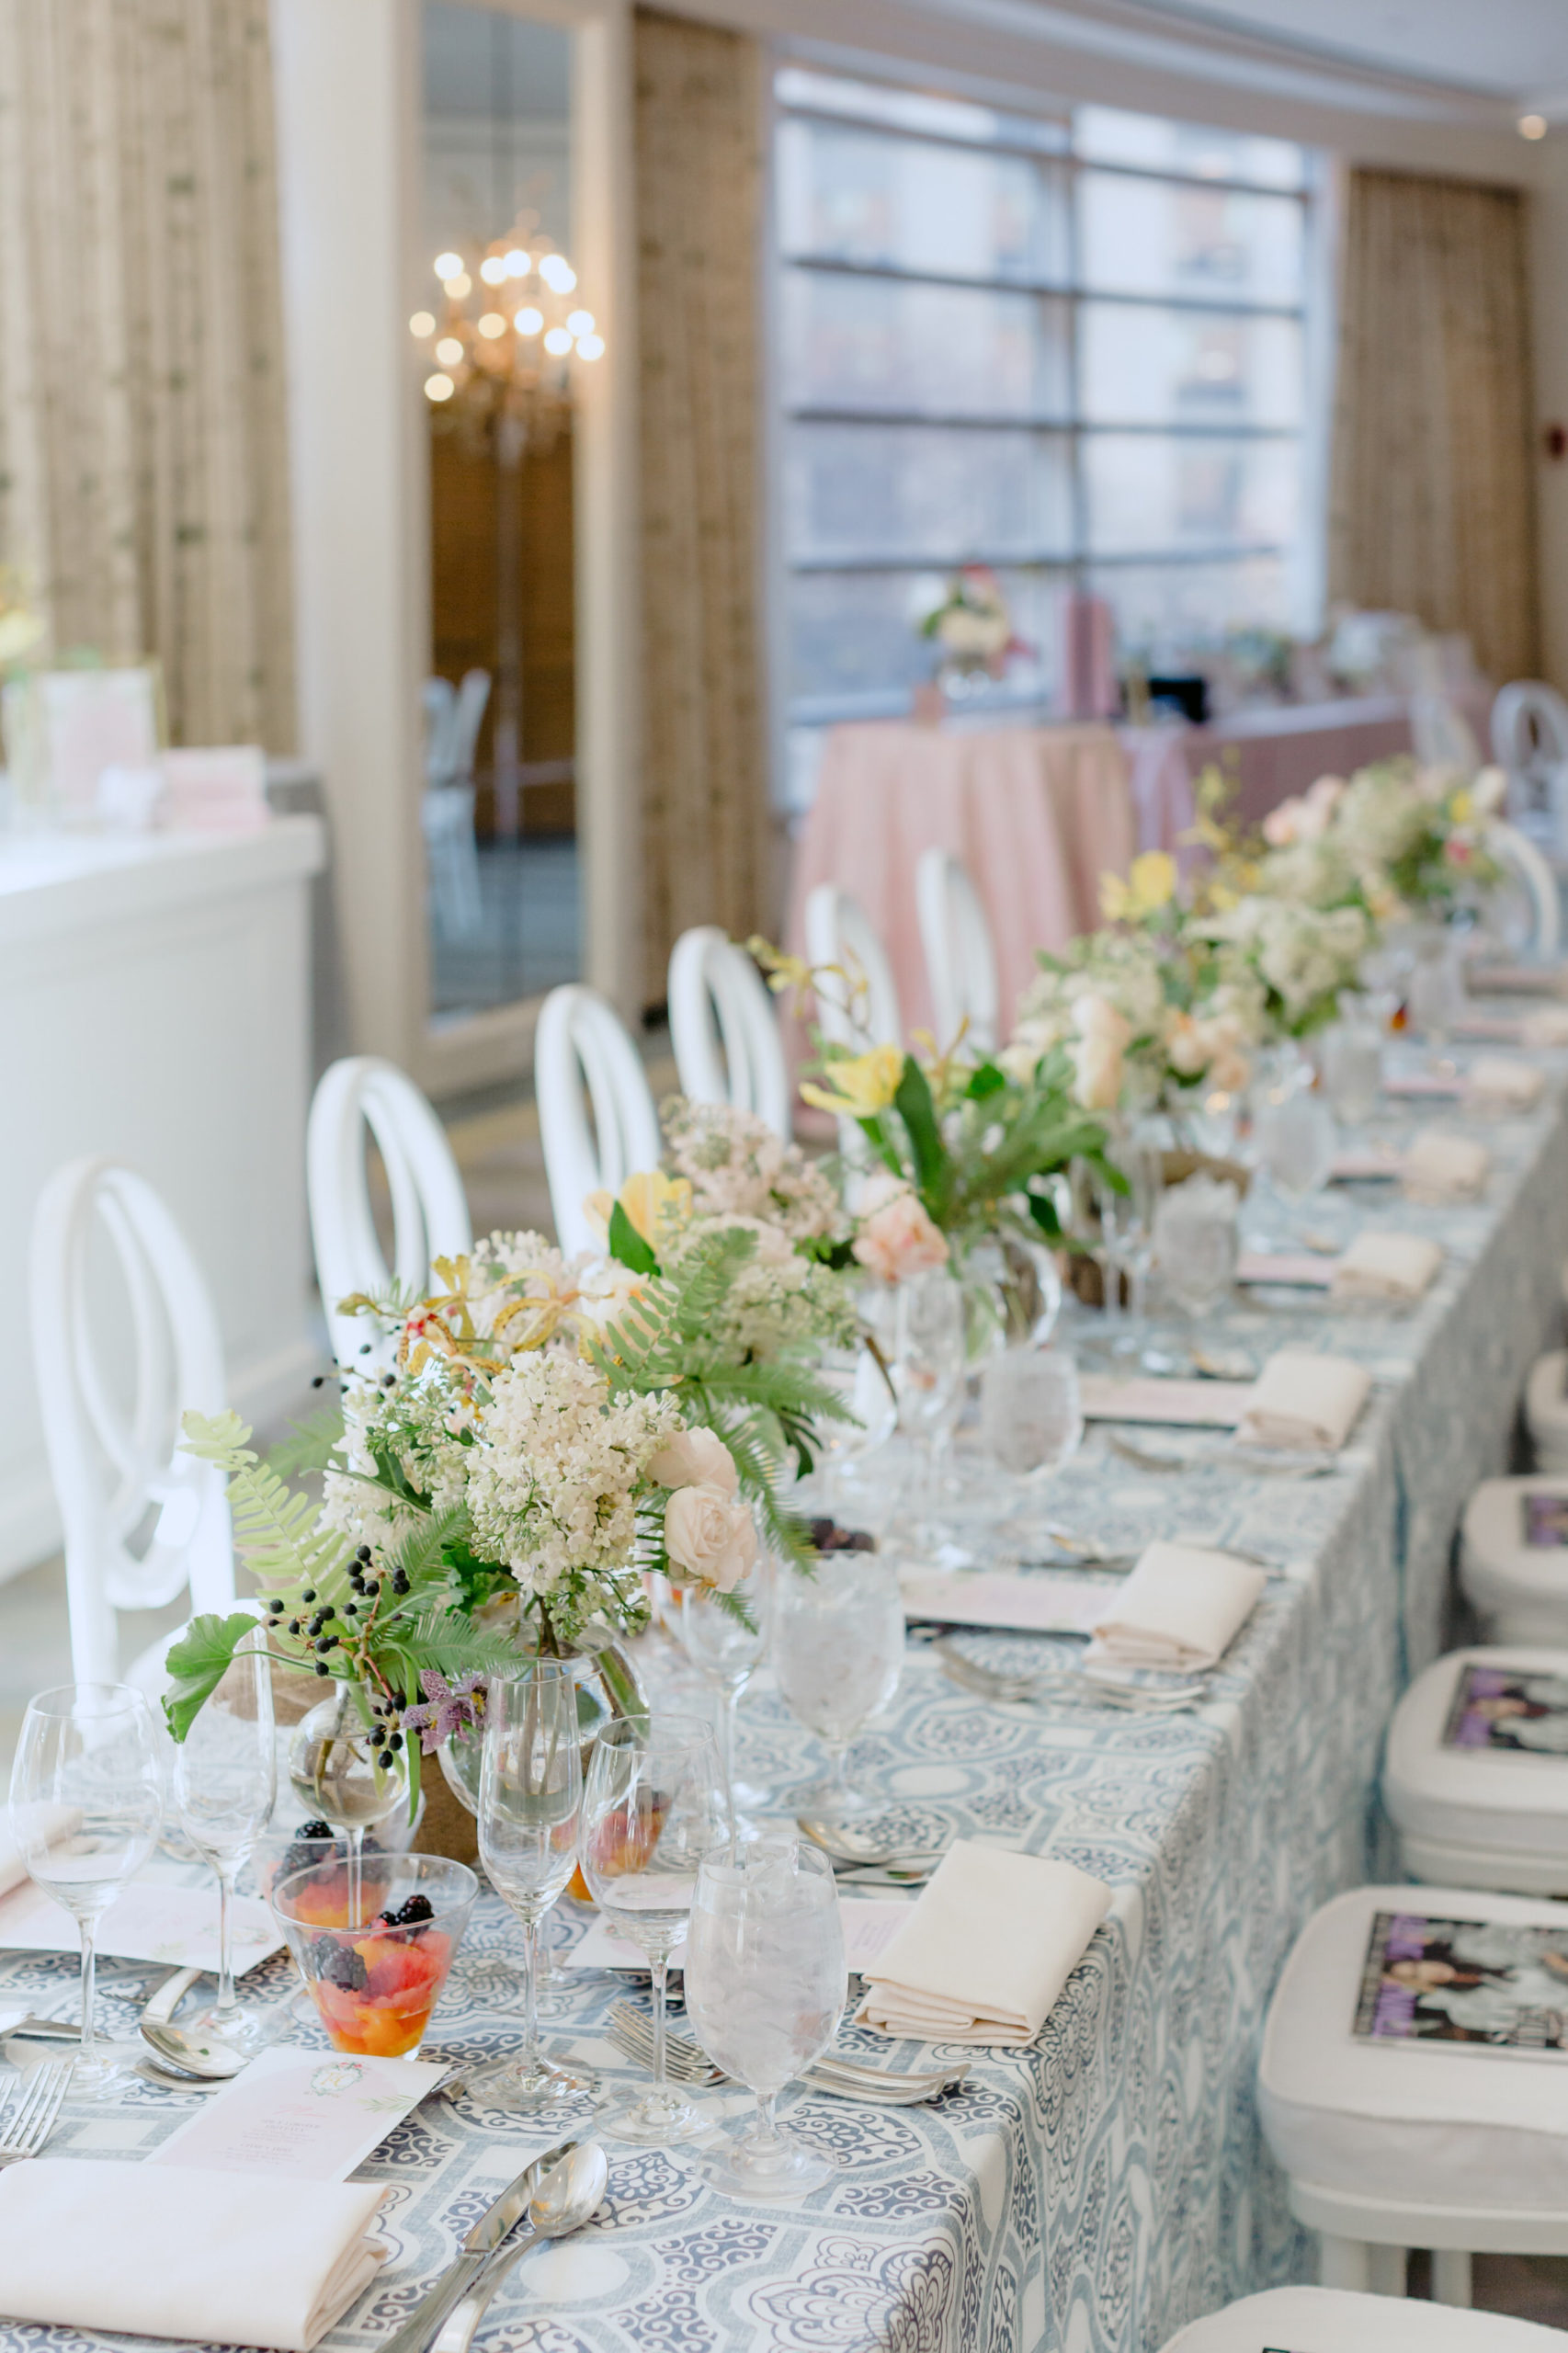 Town and Country Magazine Bridal Bruncheon